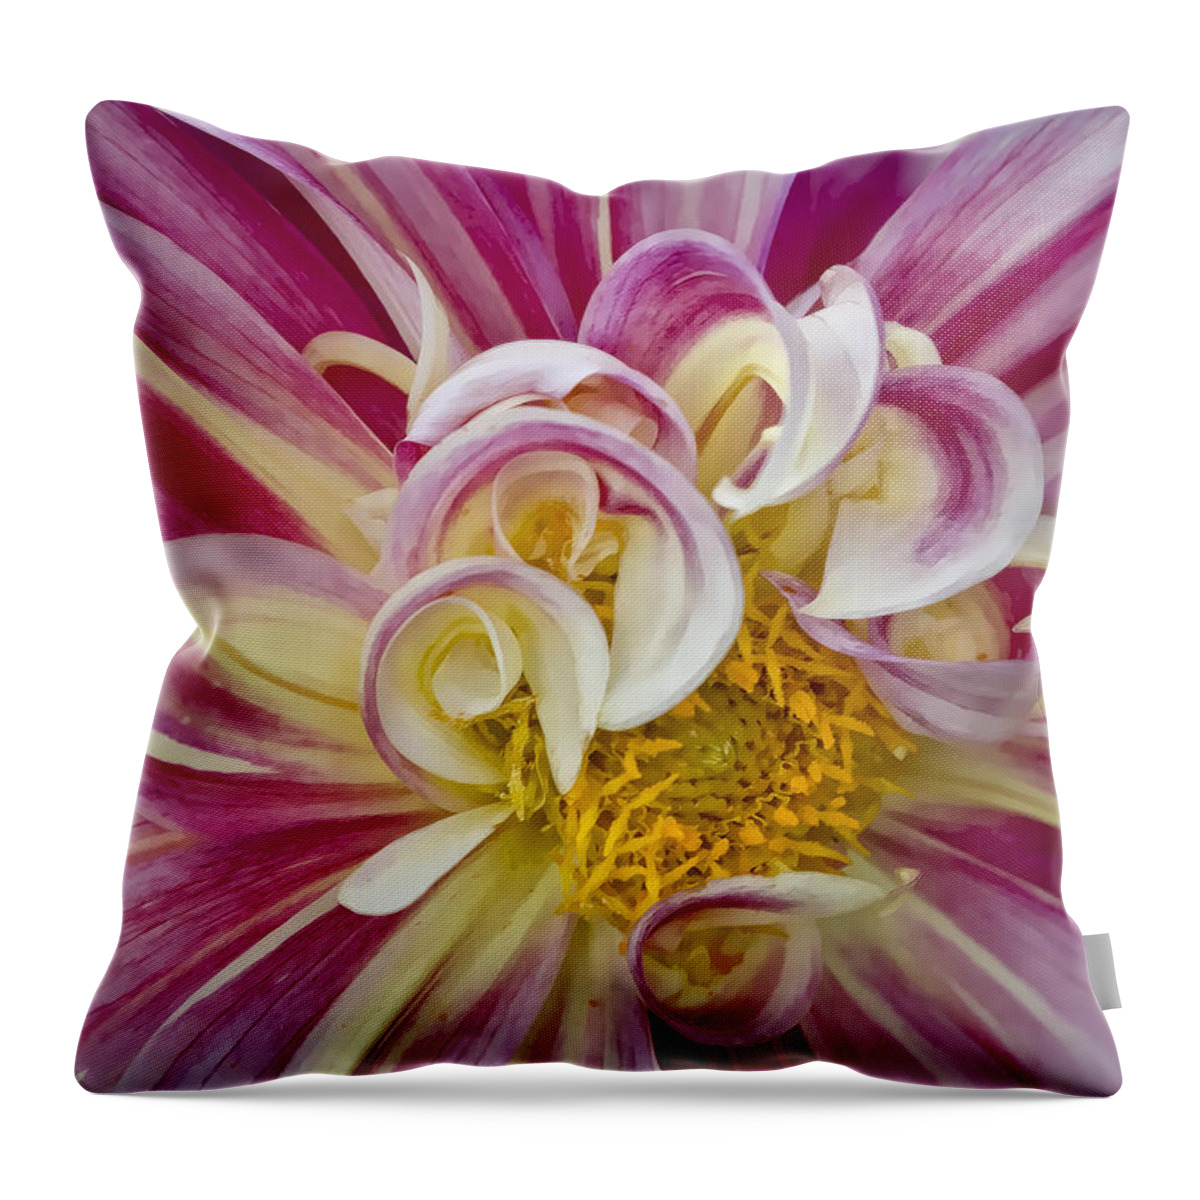 Pink & White Dahlia Throw Pillow featuring the photograph Pink and White Dahlia by Ken Barrett